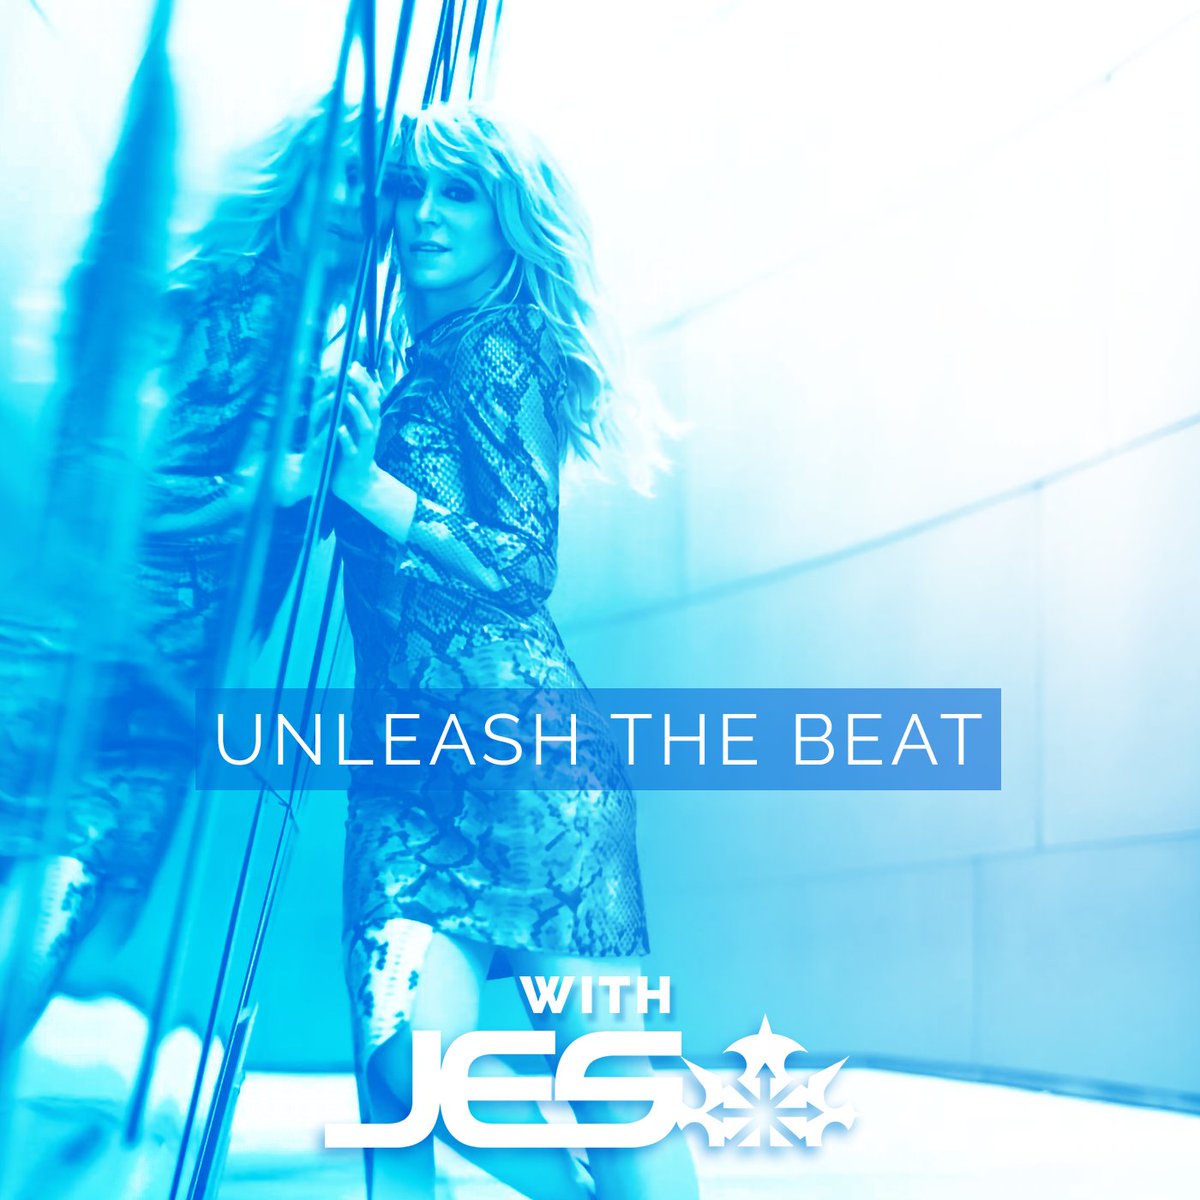 It's a special day as we celebrate the 600th episode of 'Unleash The Beat' with @Official_JES on our EDM Festival channel! Join us for an hour of the hottest electronic music. Tune in today! - di.fm/shows/unleash-… #UnleashTheBeat #JES #EDM #difm